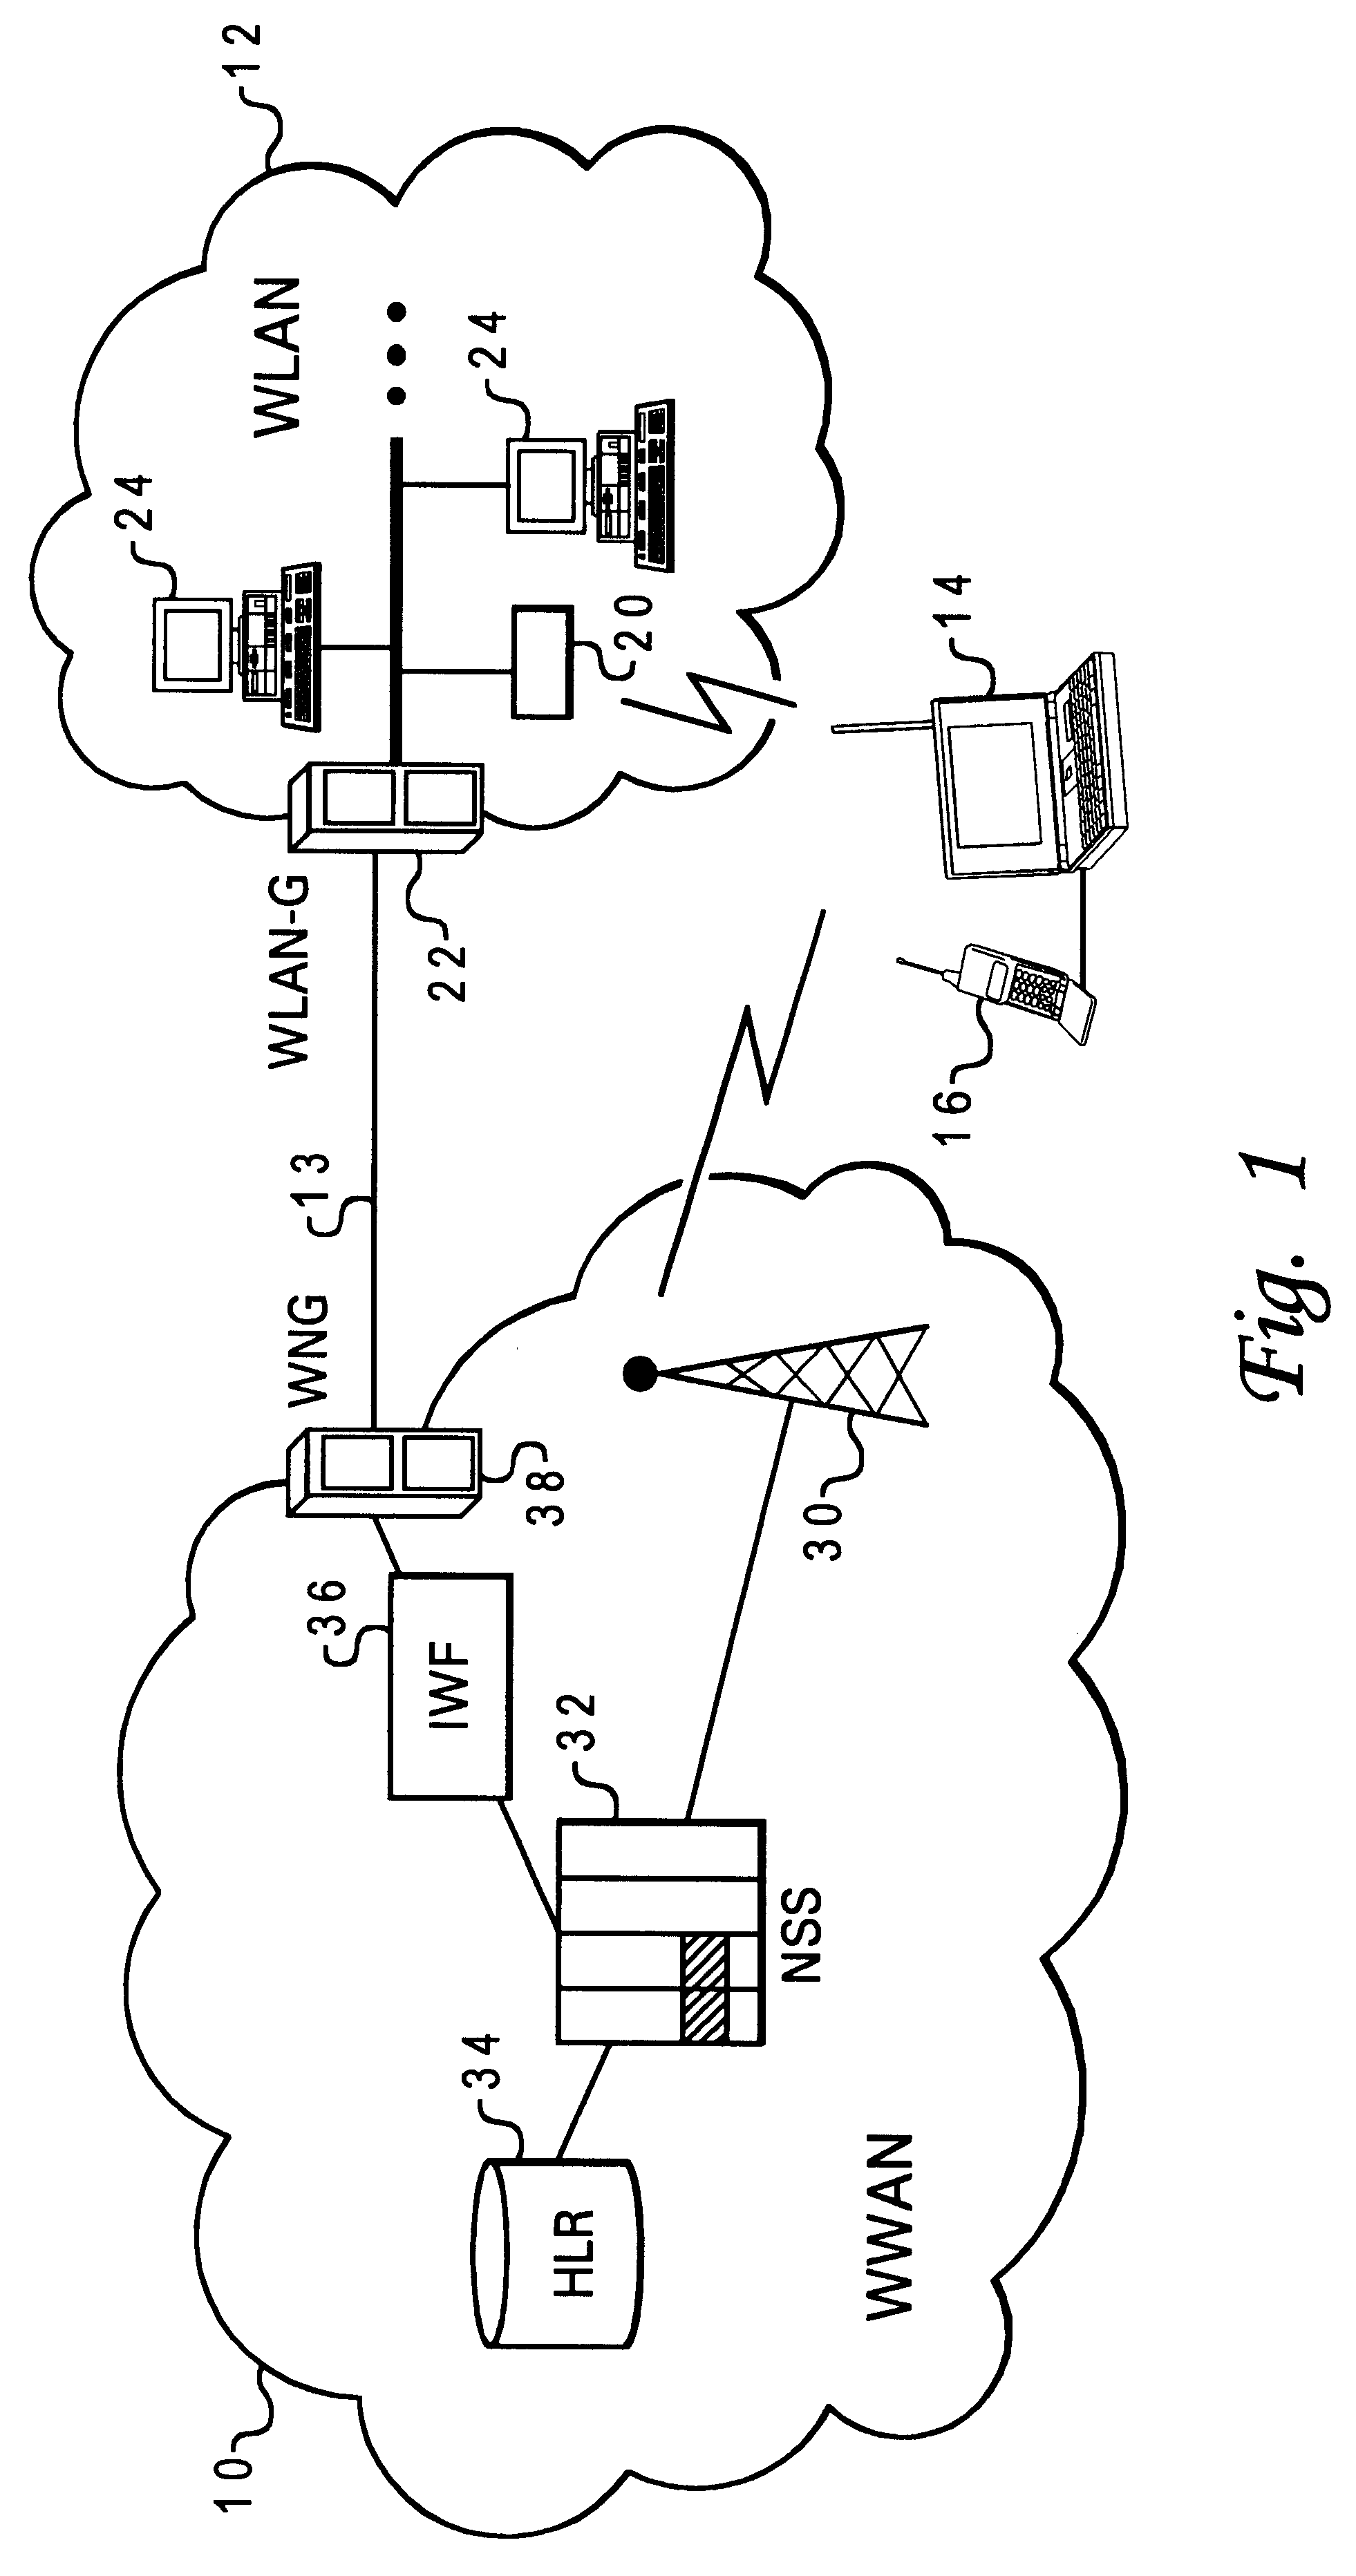 Method and system for seamless roaming between wireless communication networks with a mobile terminal